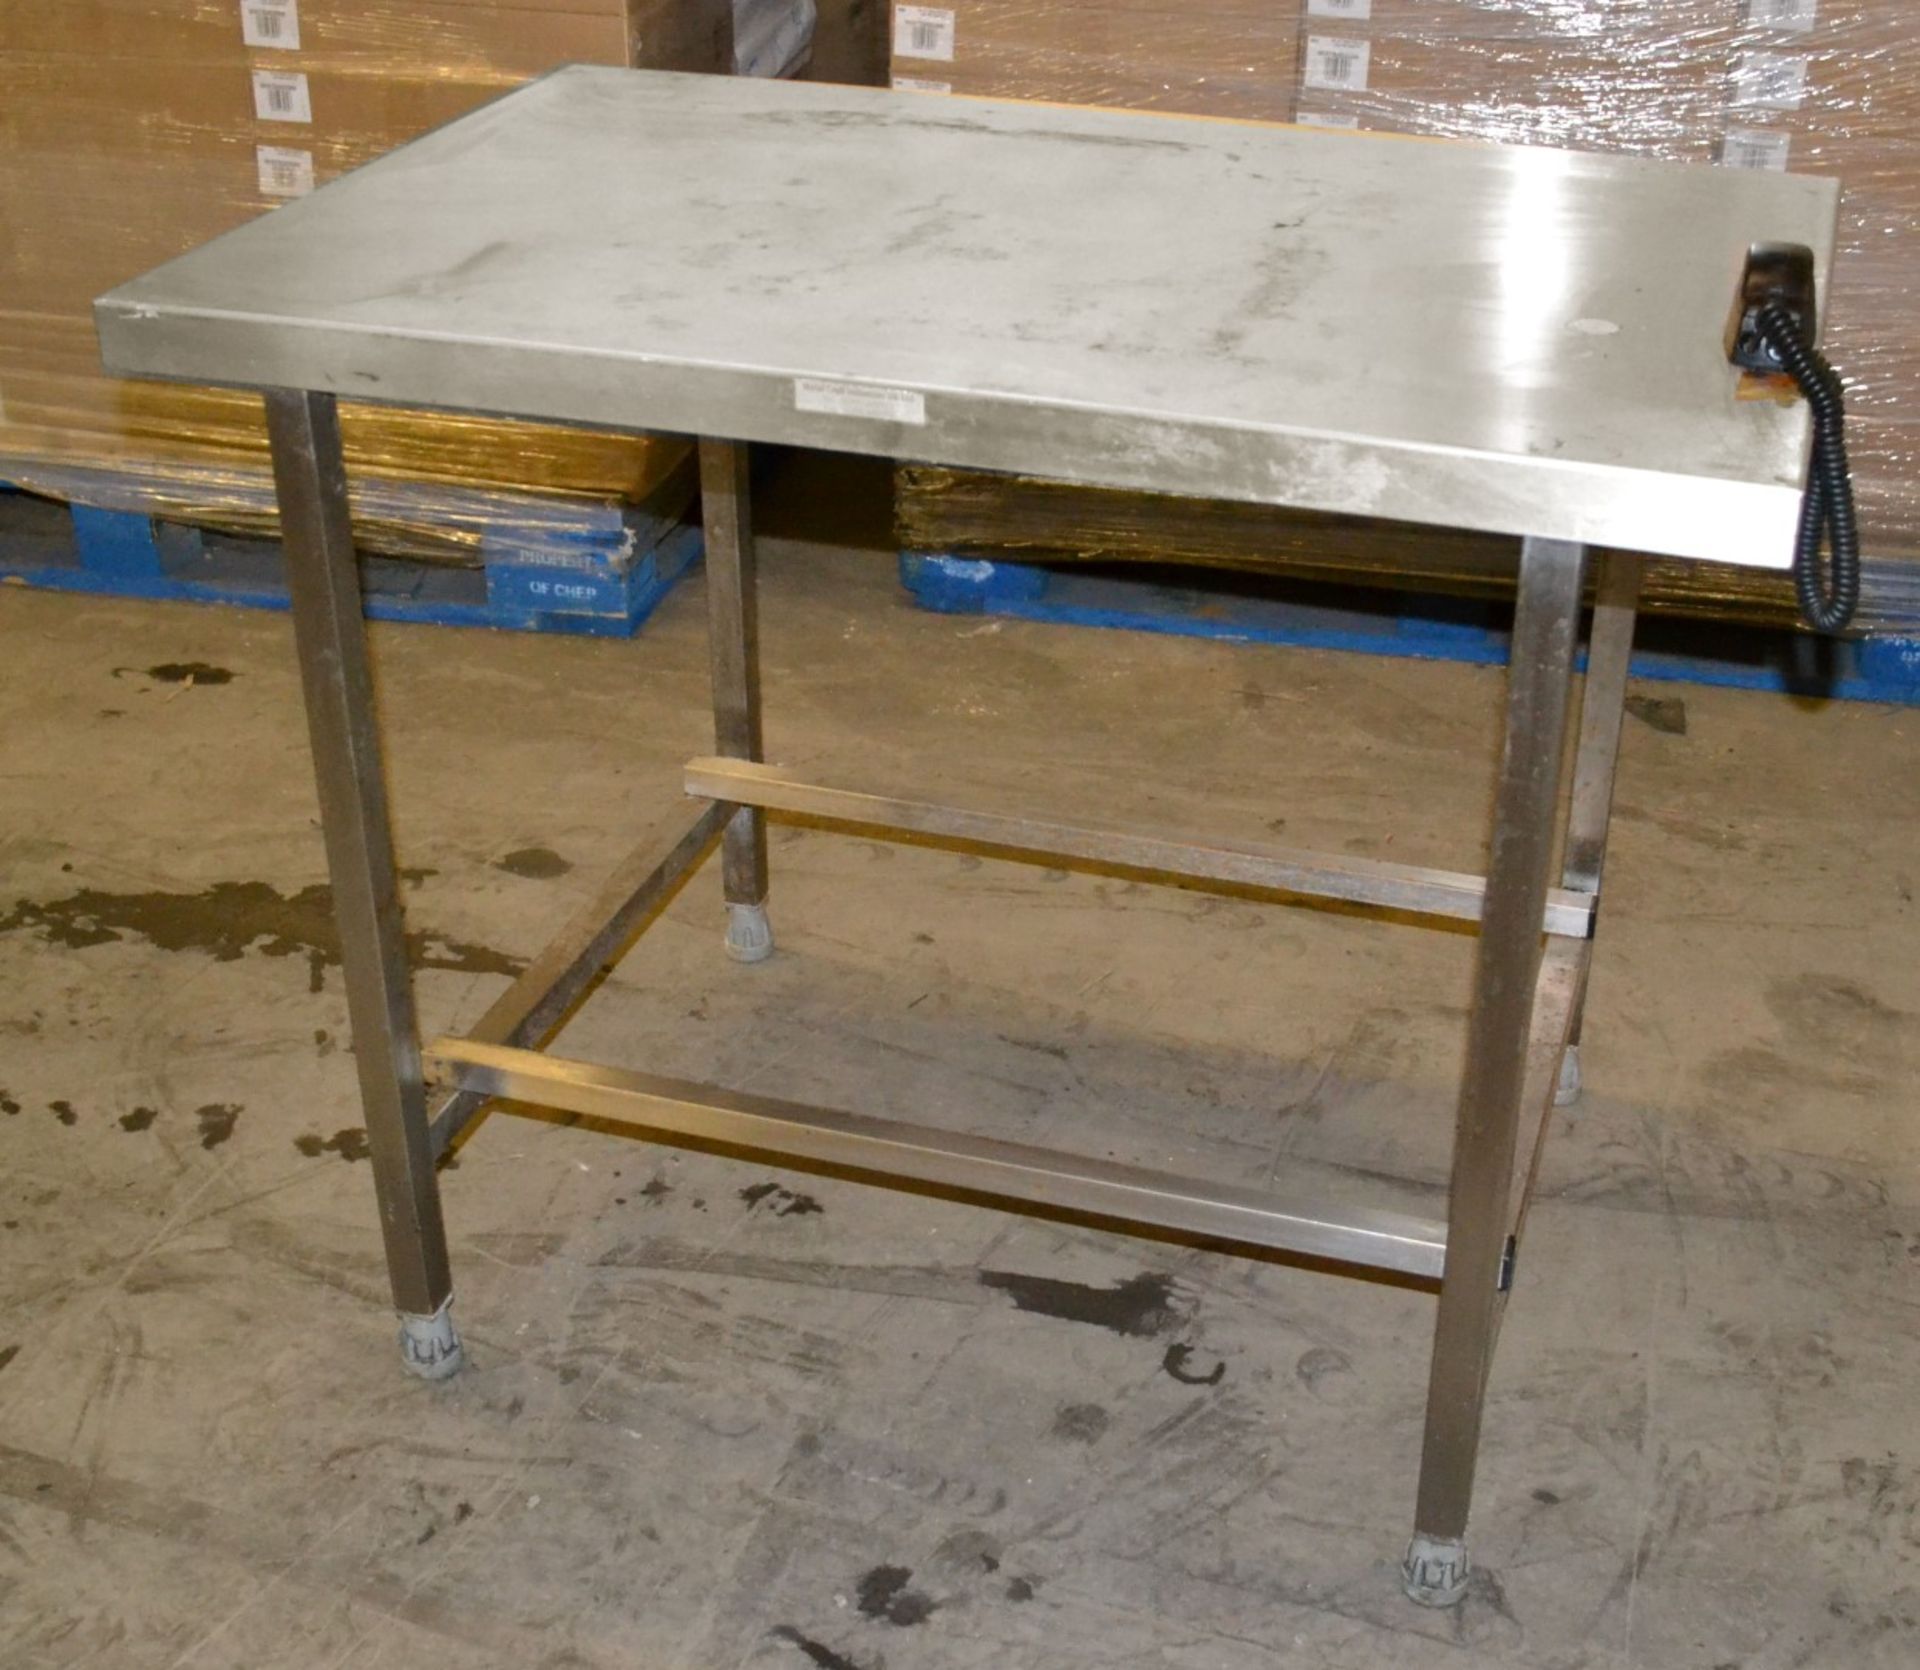 1 x Stainless Steel Prep Table With S3 Security Tag Device - Dimensions: 93 x 61 x 75cm - Ref: MC137 - Image 6 of 6